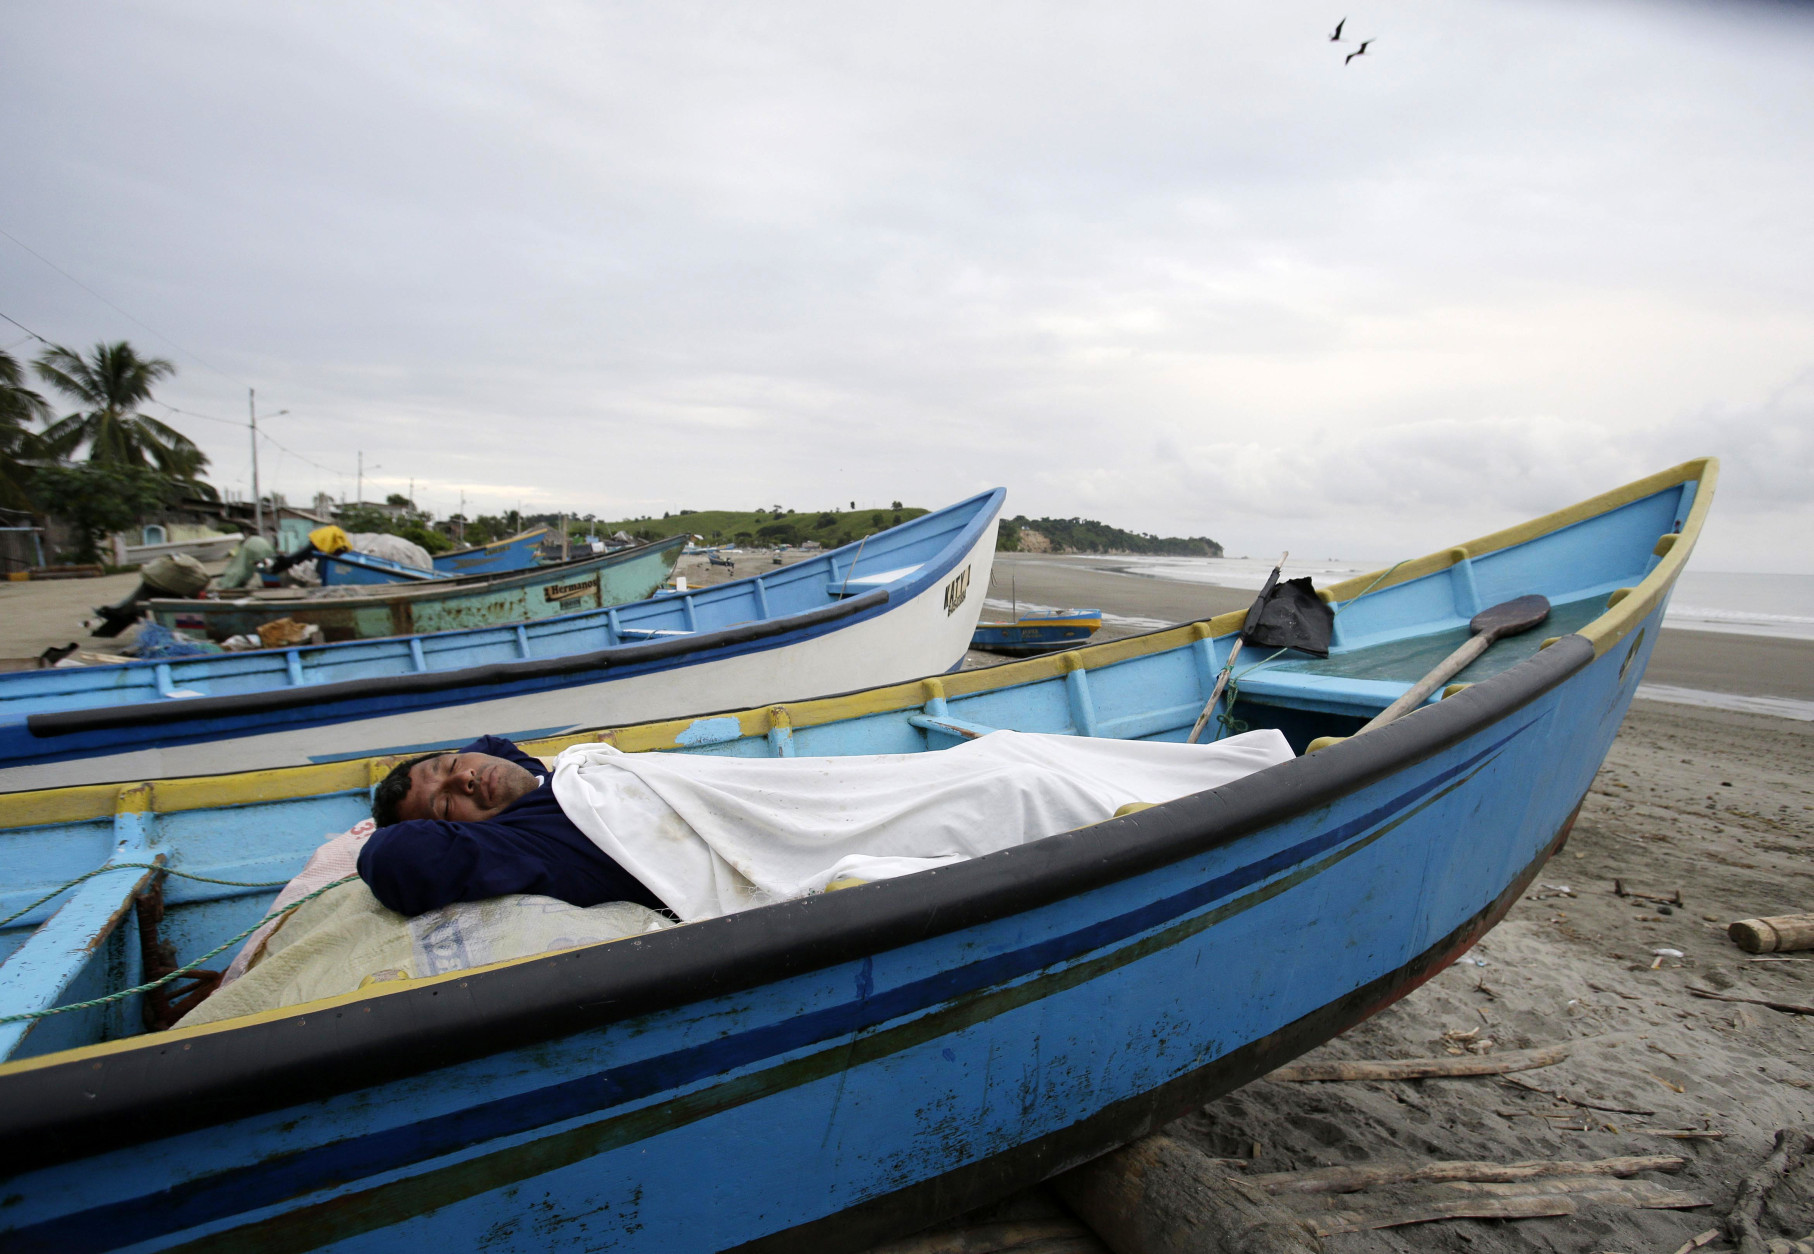 A man, his home destroyed by a 7.8 magnitude earthquake, sleeps in his uncle's boat docked along the shore, in La Chorrera, Ecuador, Monday, April 18, 2016. The Saturday night quake left a trail of ruin along Ecuadors normally placid Pacific Ocean coast. At least 350 people died and thousands are homeless. President Rafael Correa said early Monday that the death toll would surely rise, and in a considerable way. (AP Photo/Dolores Ochoa)